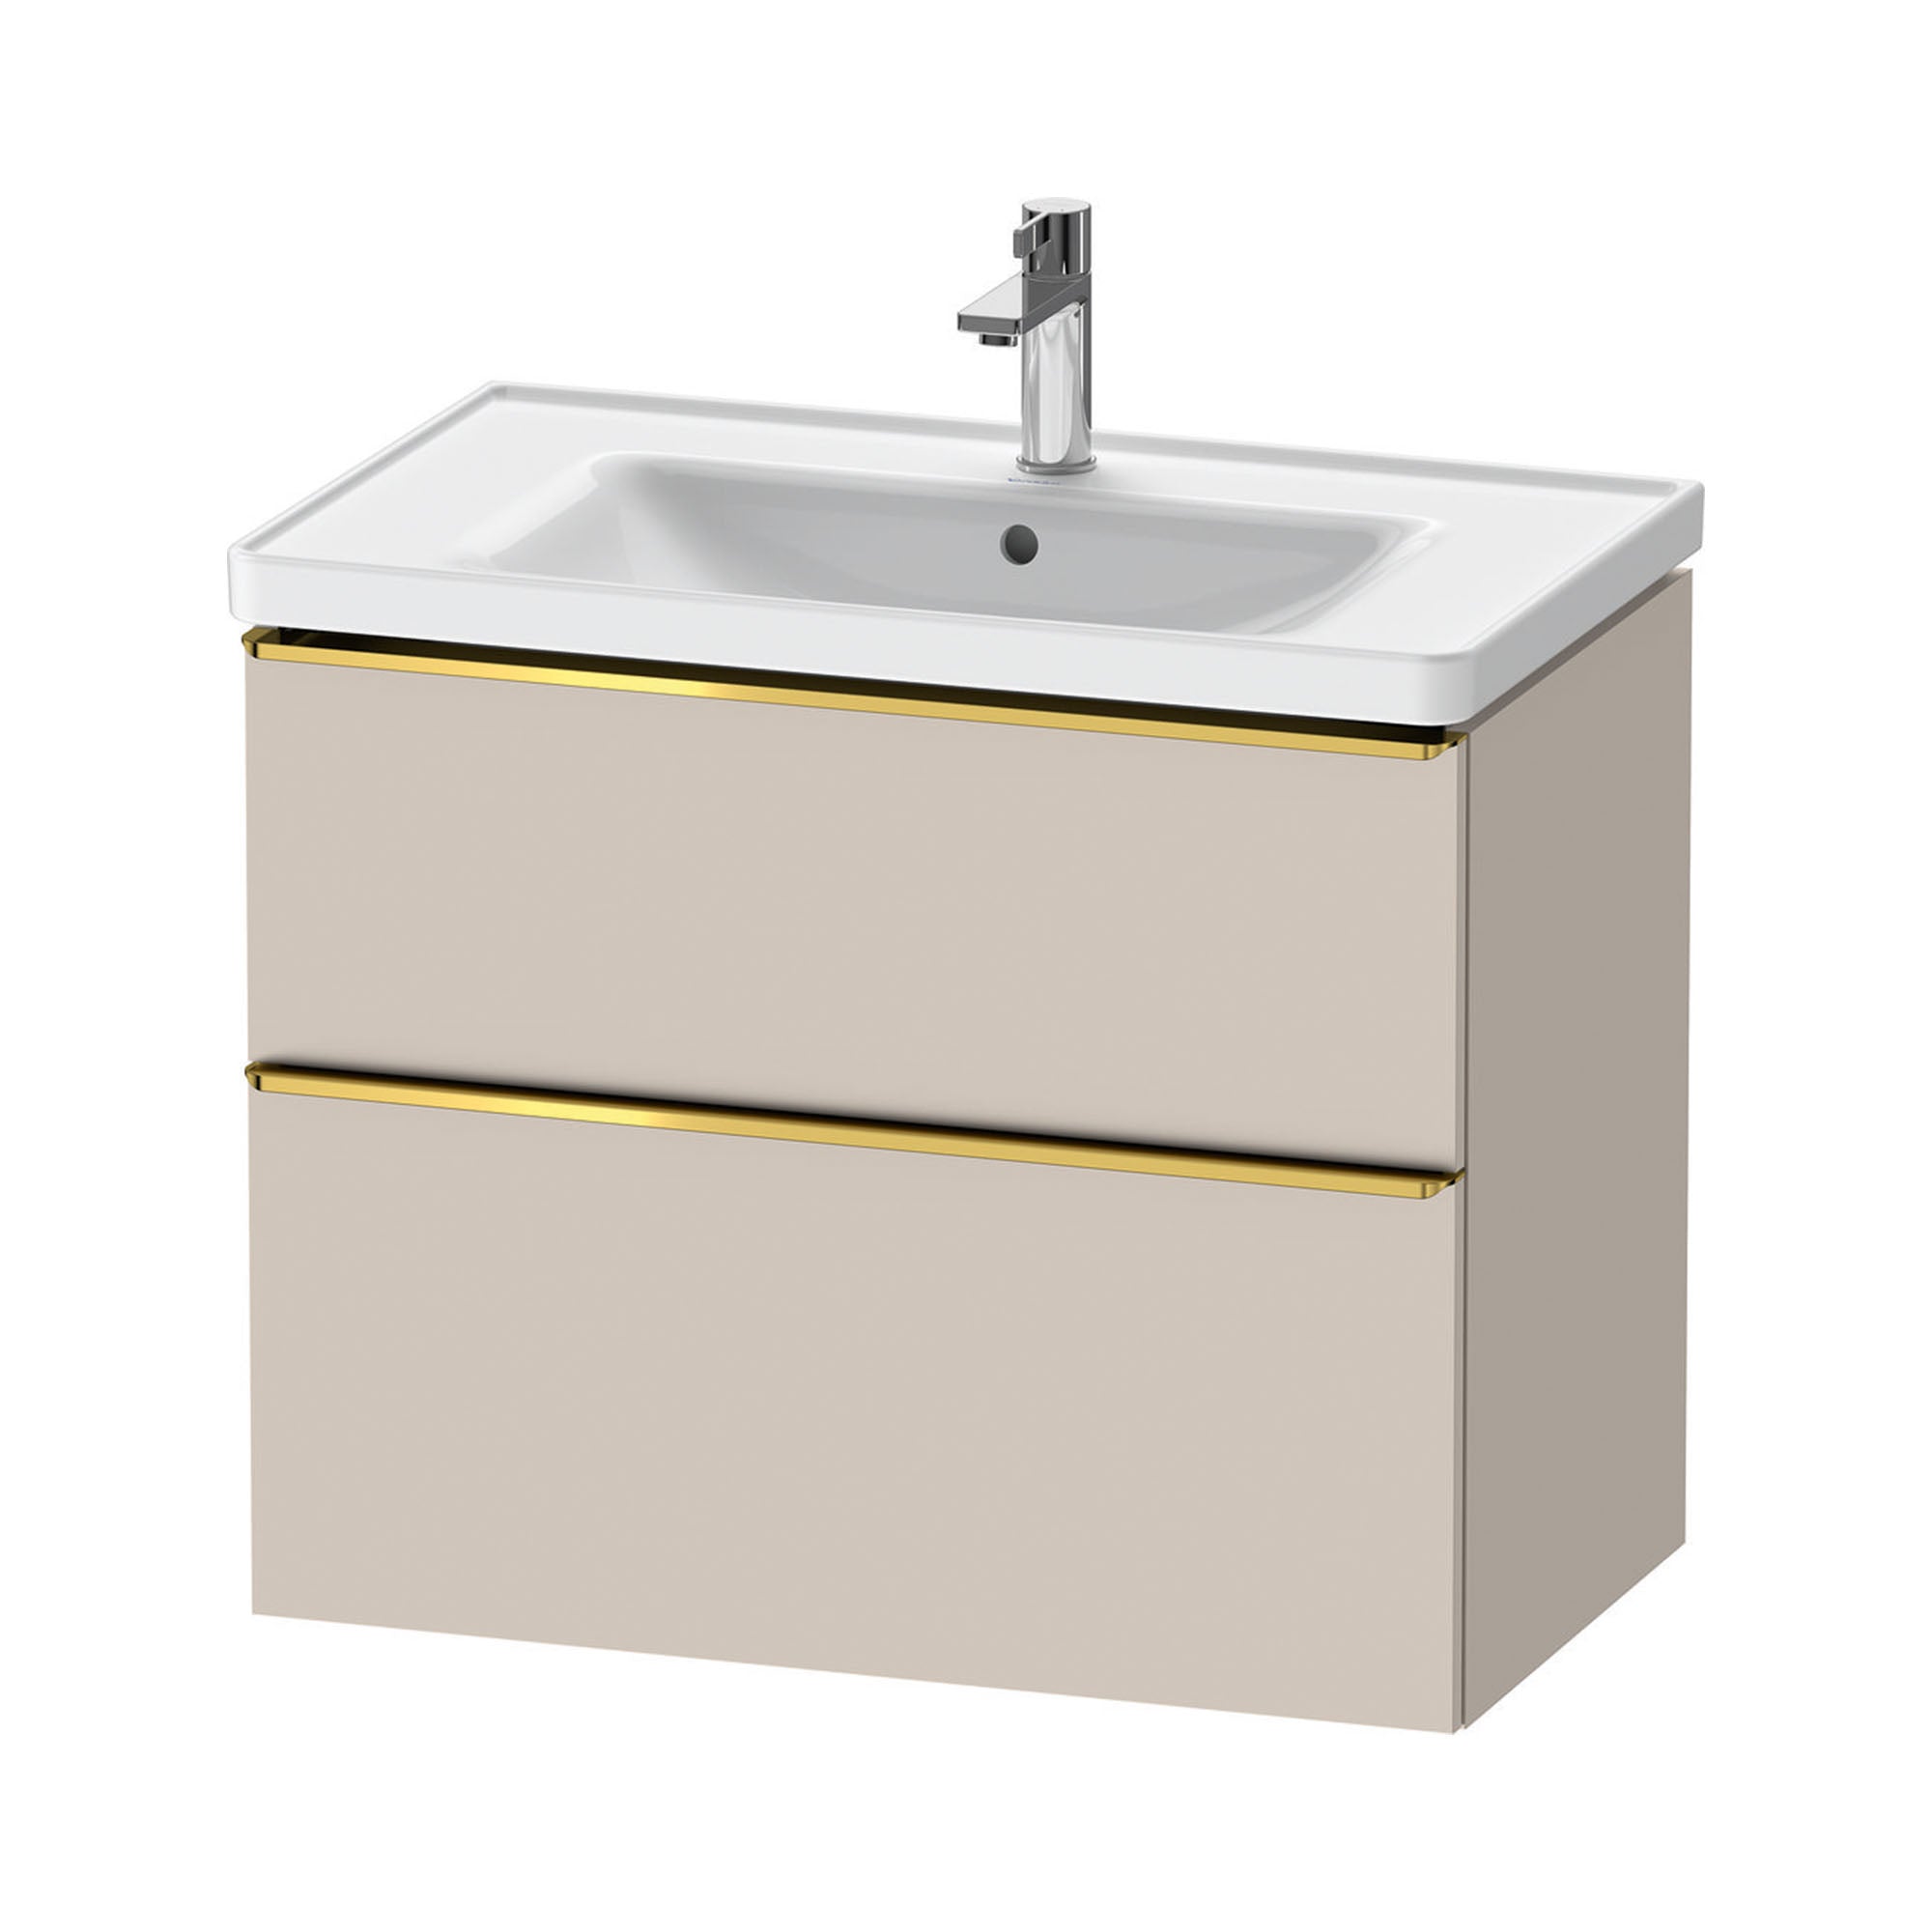 duravit d-neo 800mm wall mounted vanity unit with d-neo basin taupe gold handles